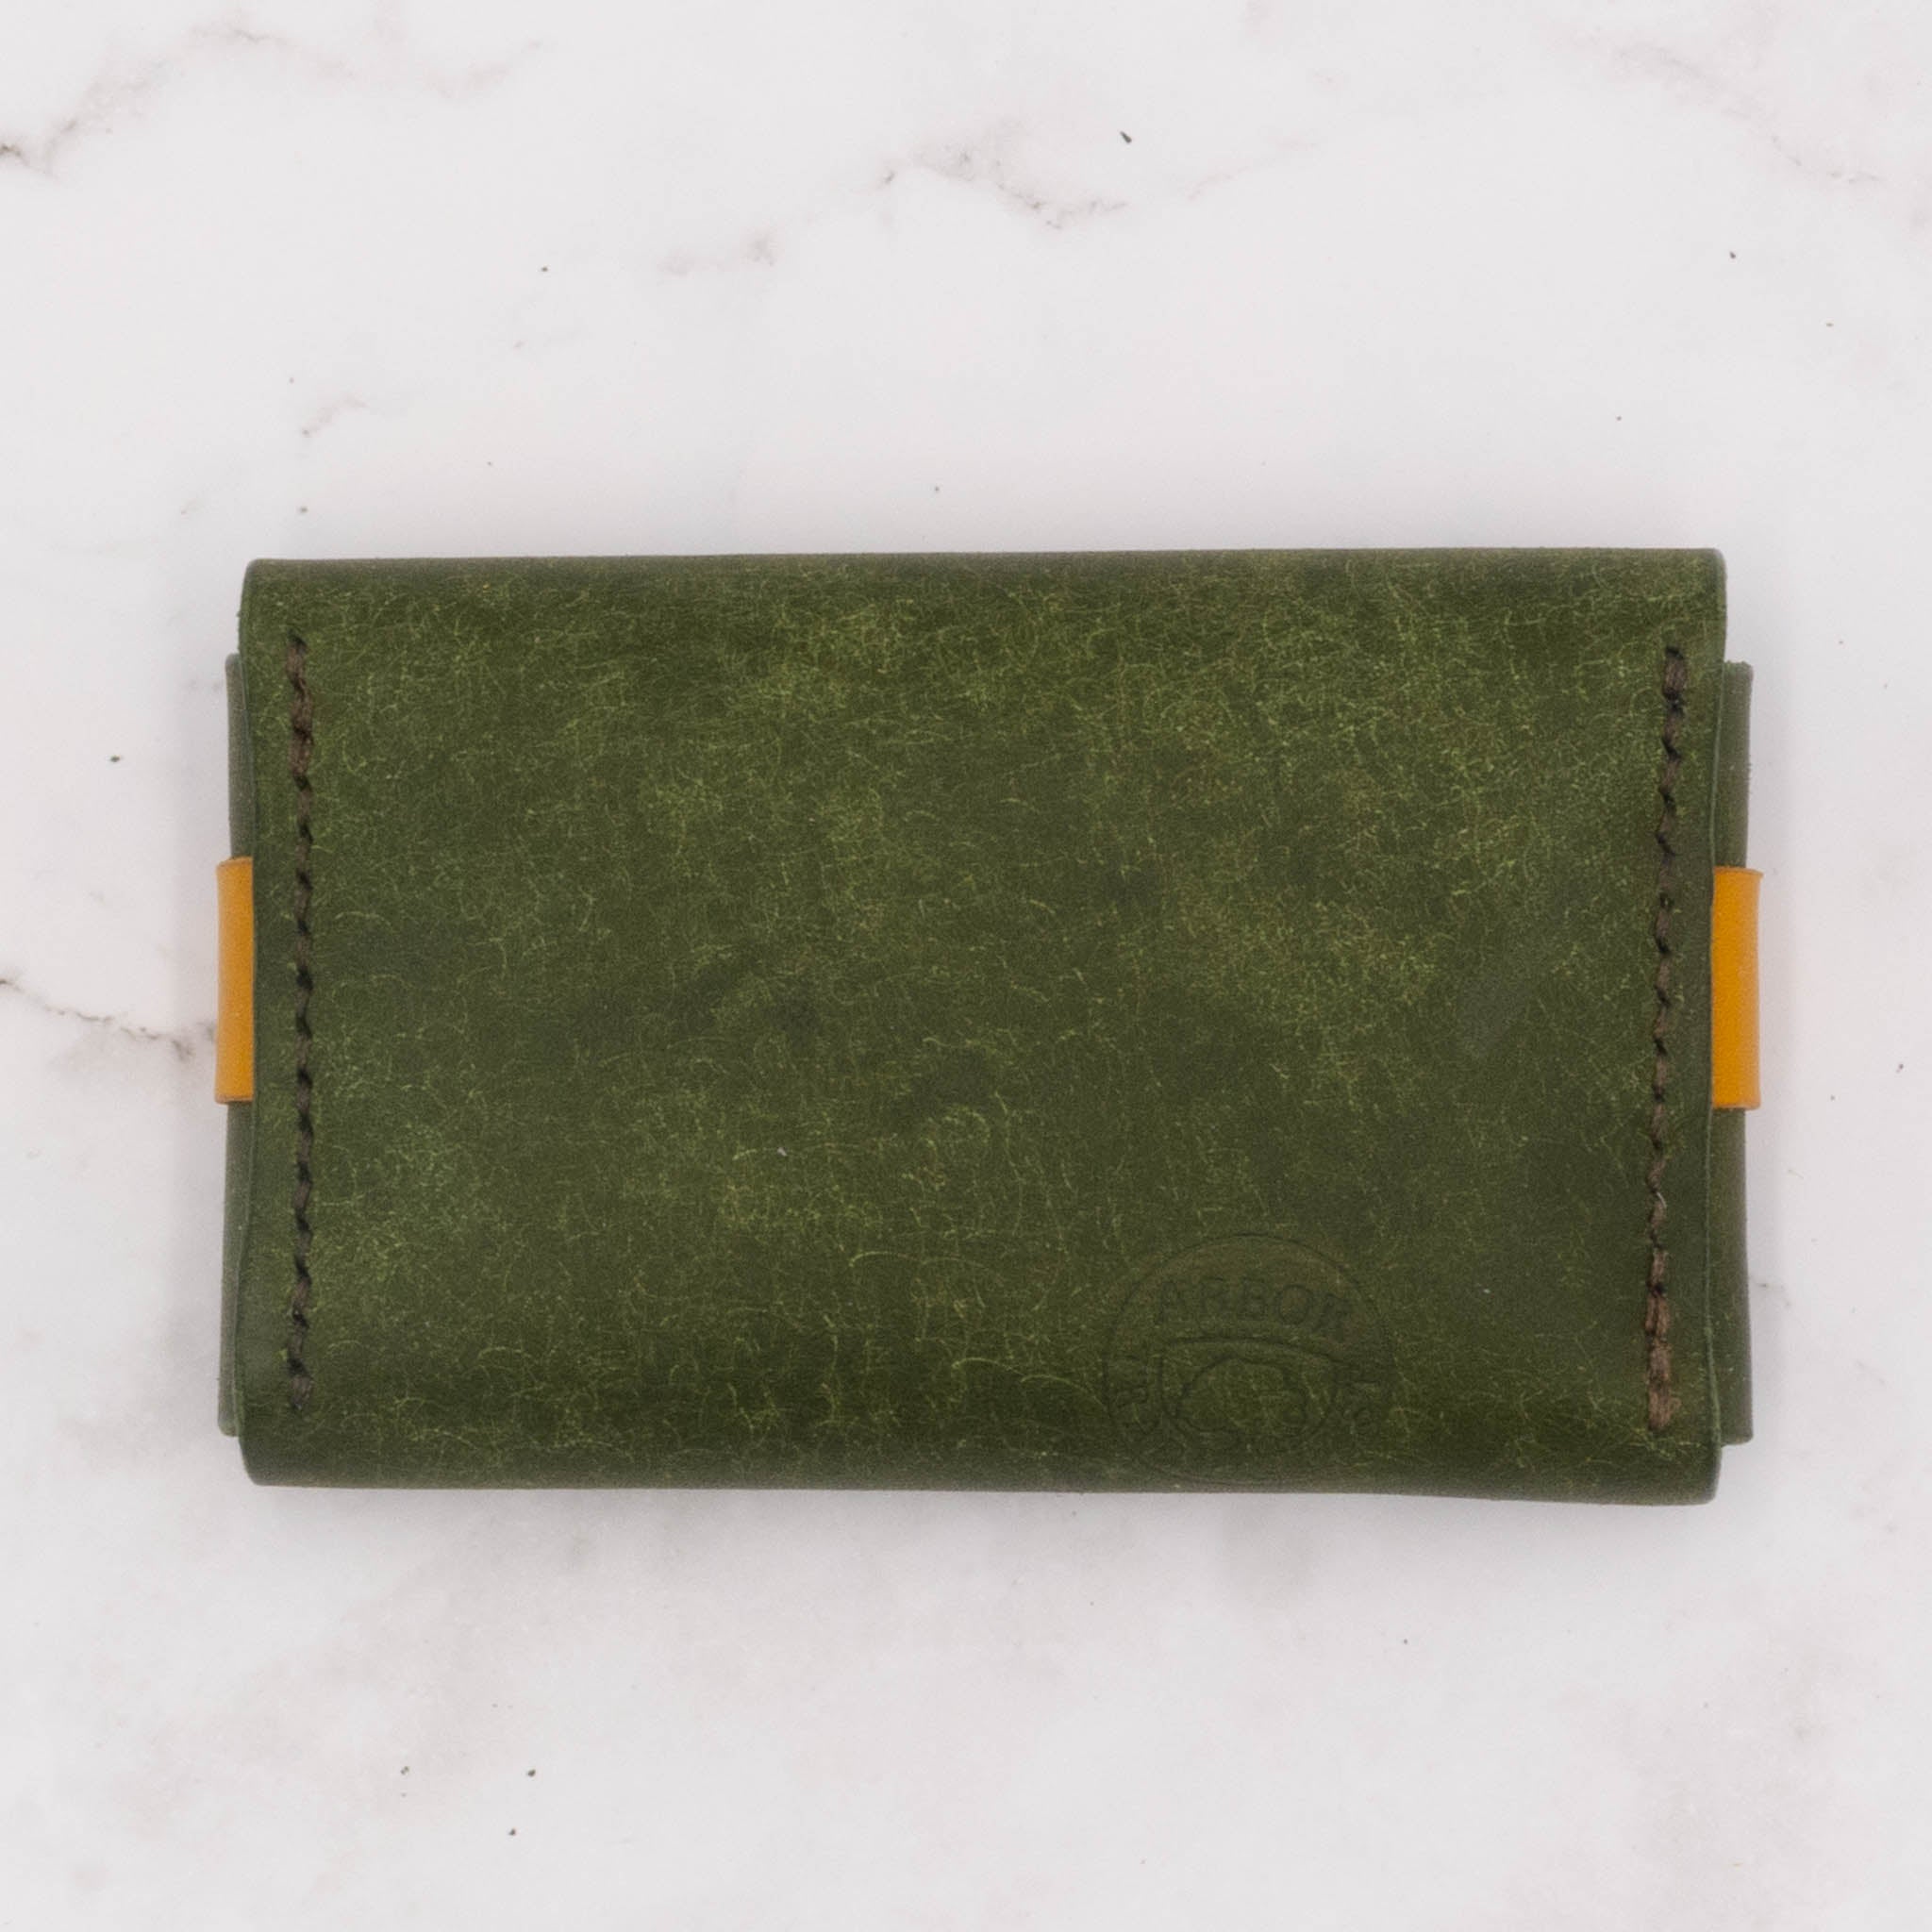 Handcrafted Leather Flap Card Case Wallet - Olive Green with Yellow Strap